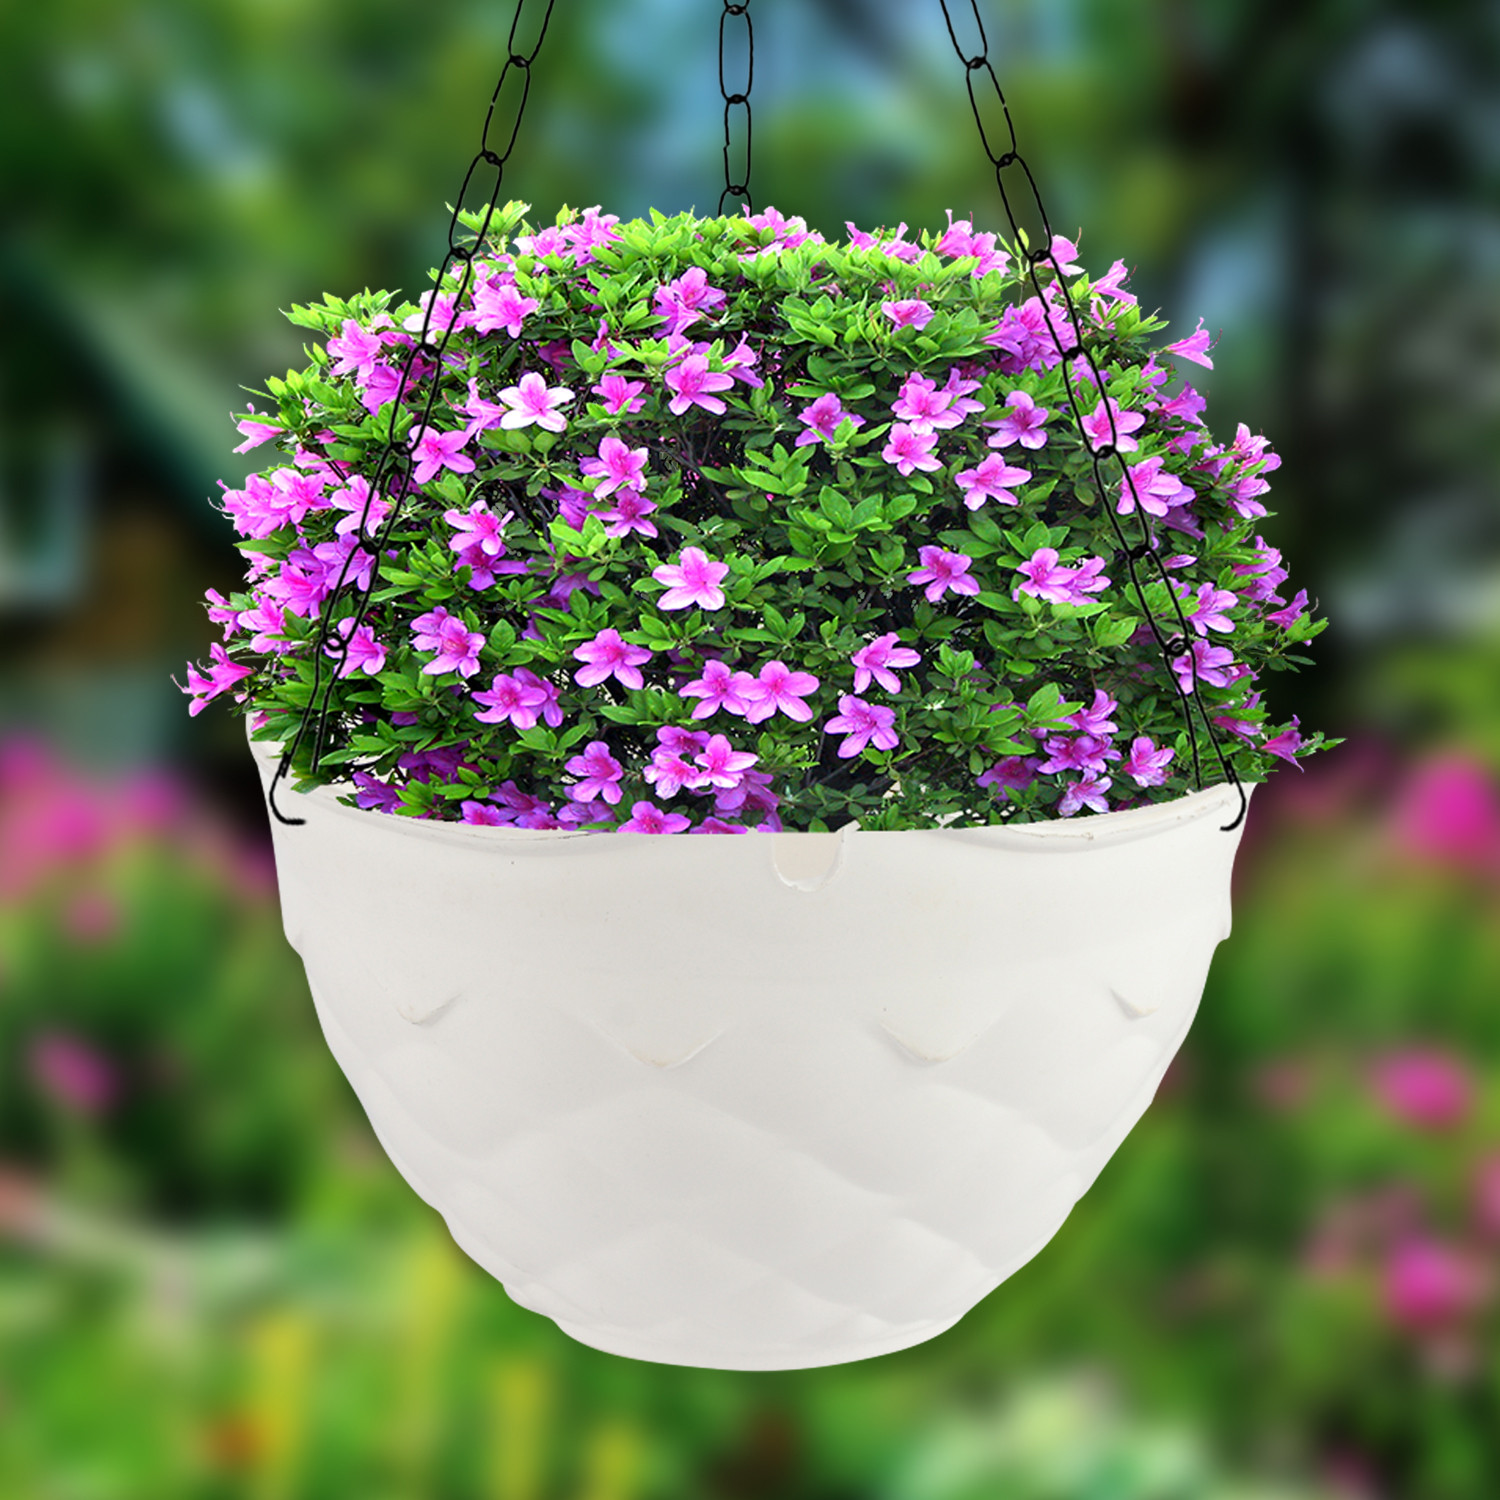 Kuber Industries Diamond Flower Pot|Durable Plastic Hanging Basket Flower Planter with Chain for Home|Garden|Balcony|Pack of 2 (Red & White)